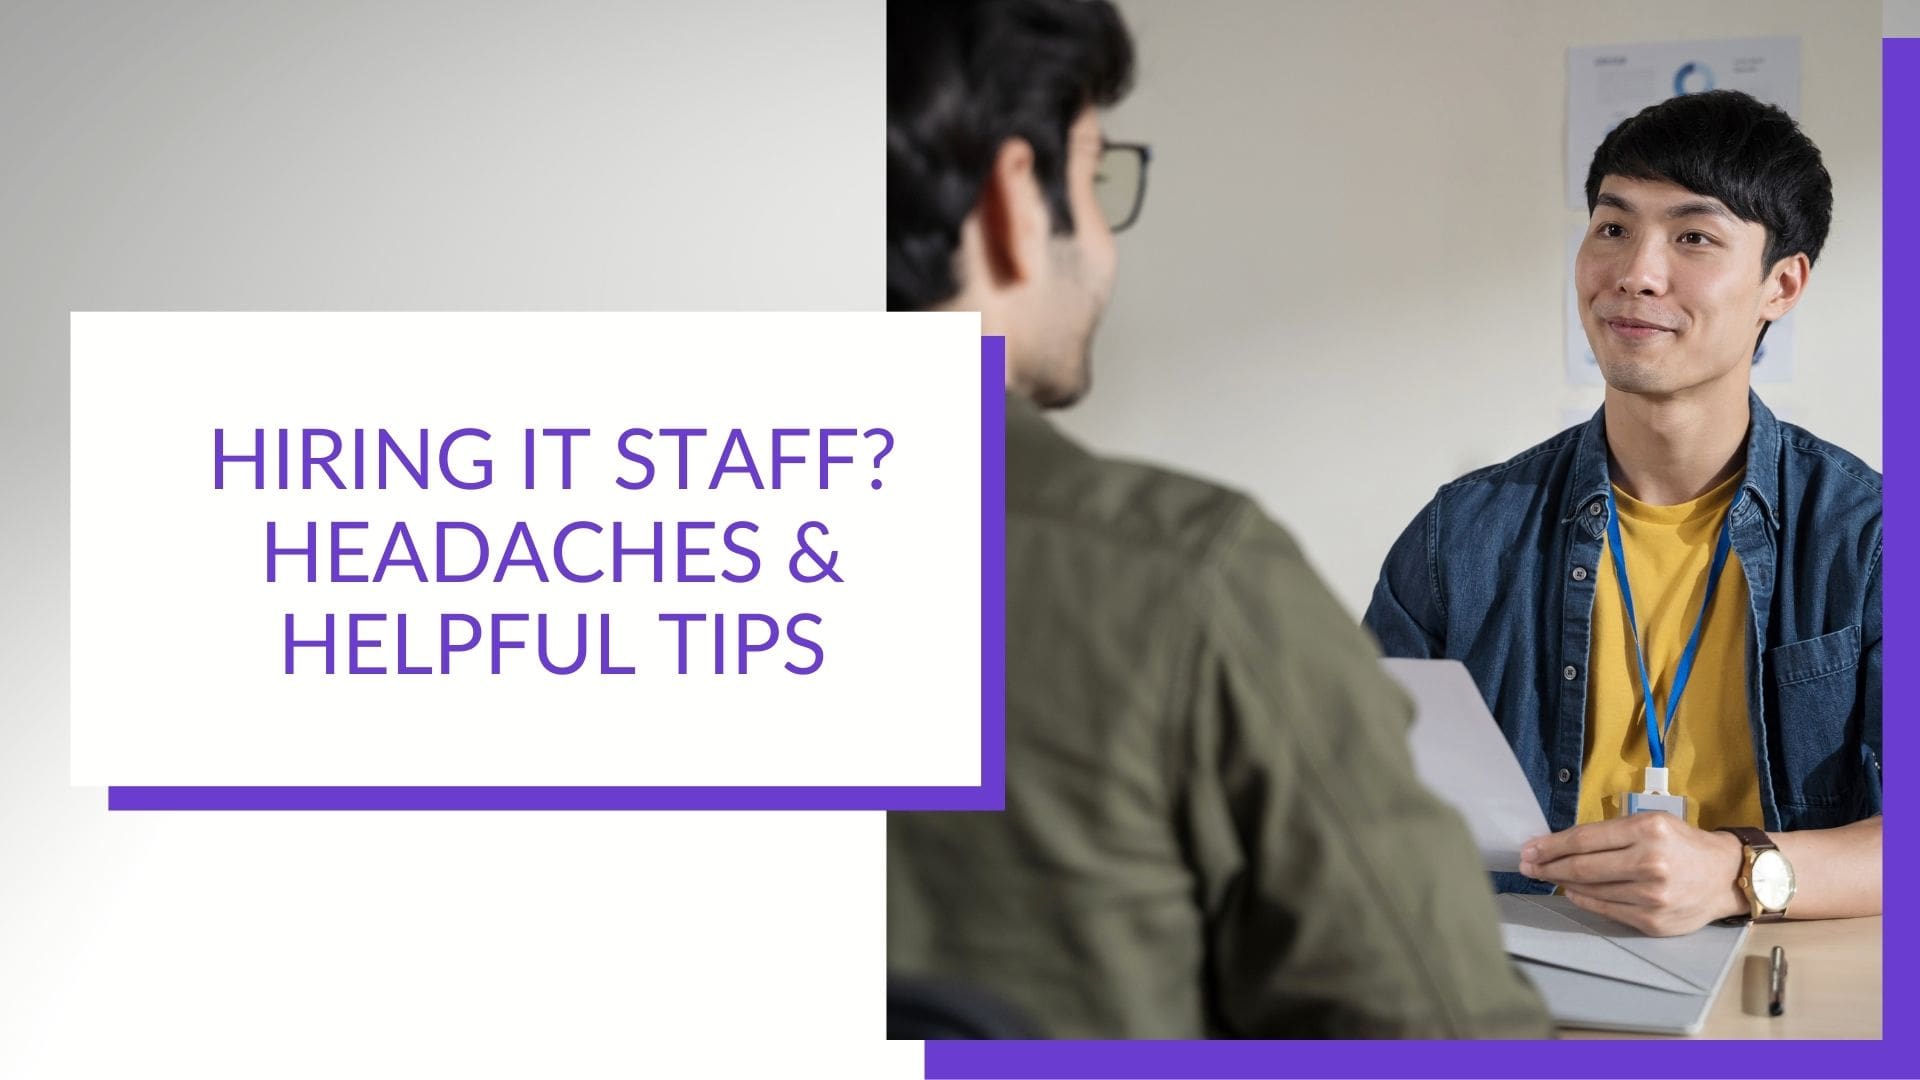 Hiring IT Staff Headaches and Tips